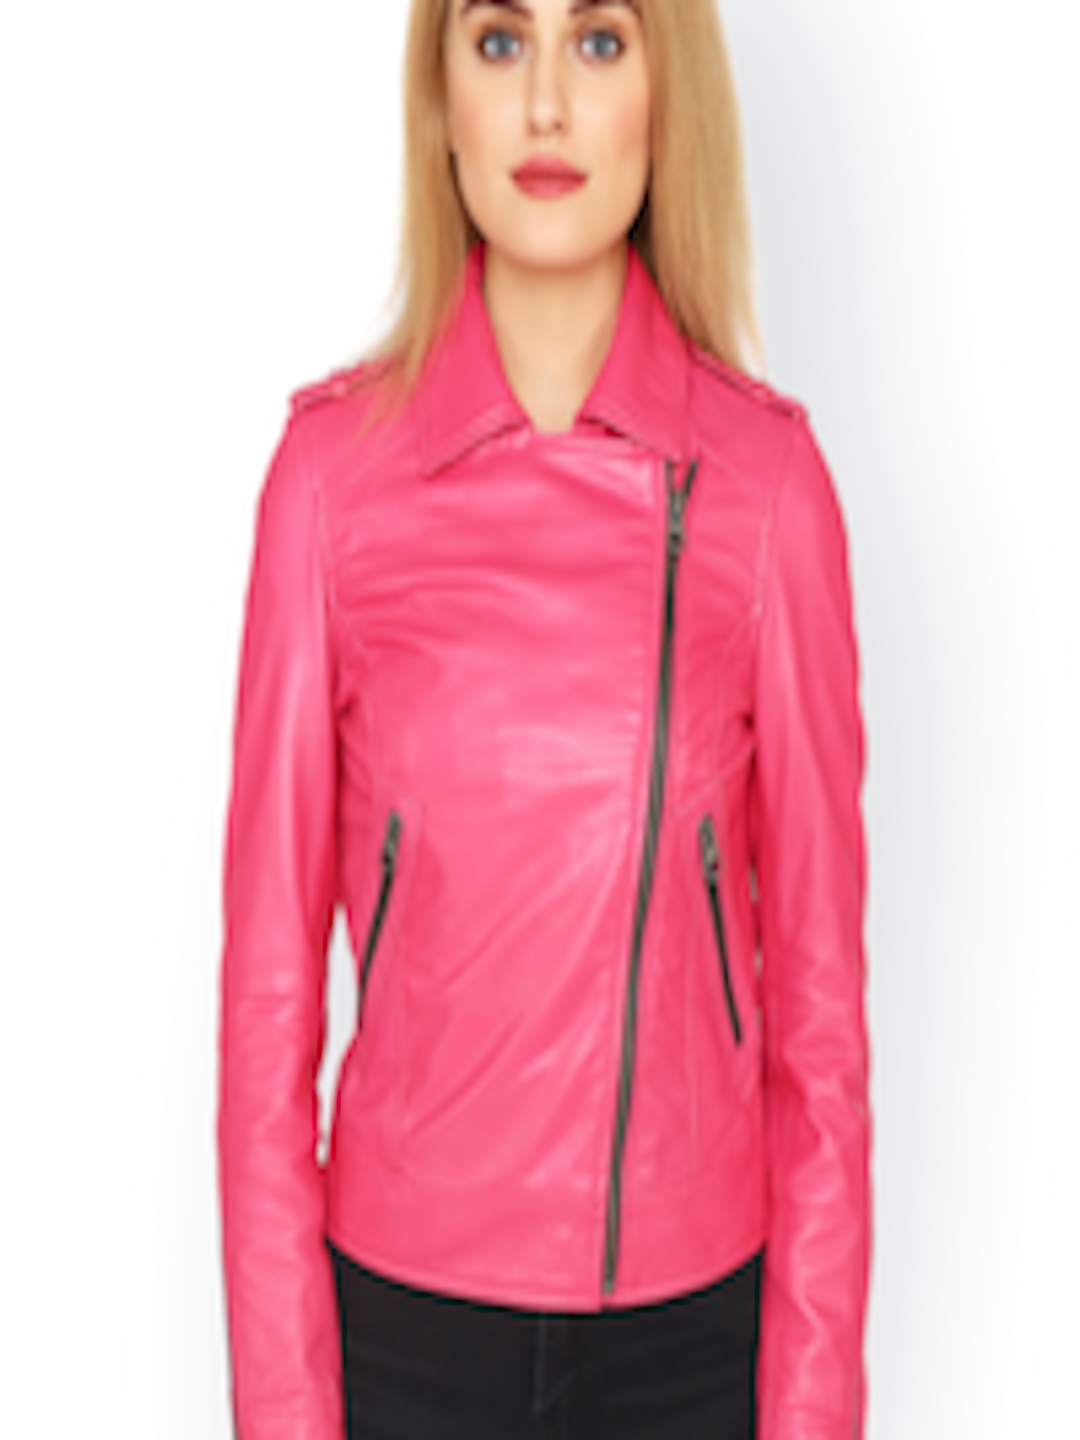 Buy Justanned Women Pink Leather Jacket - Jackets for Women 7029269 ...